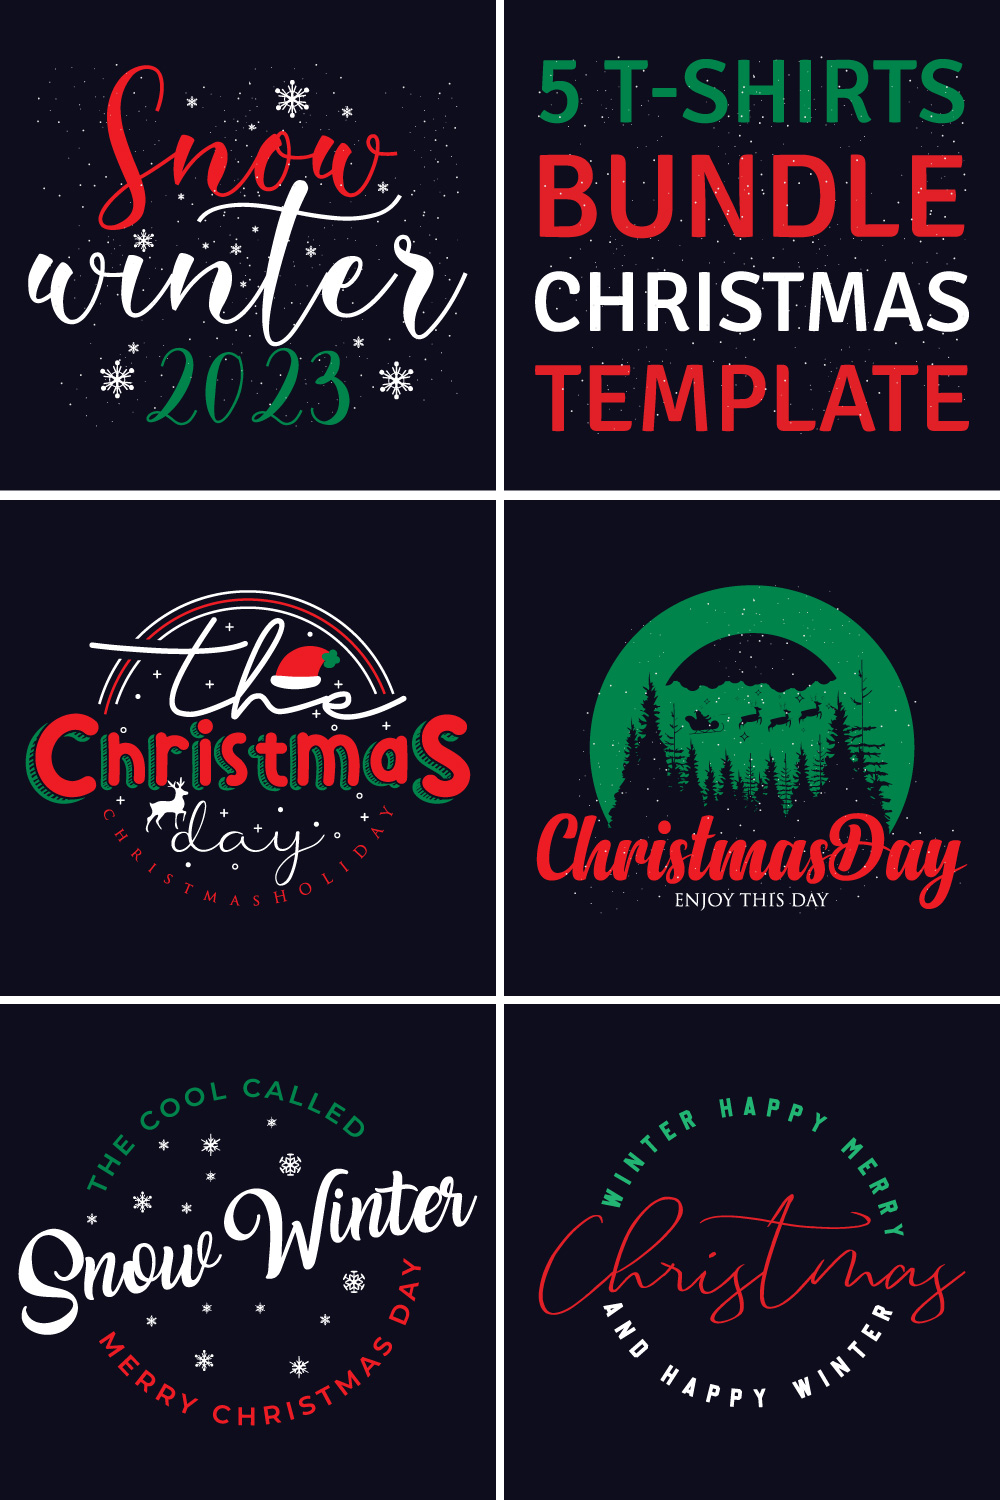 A selection of colorful images for prints on a Christmas theme.